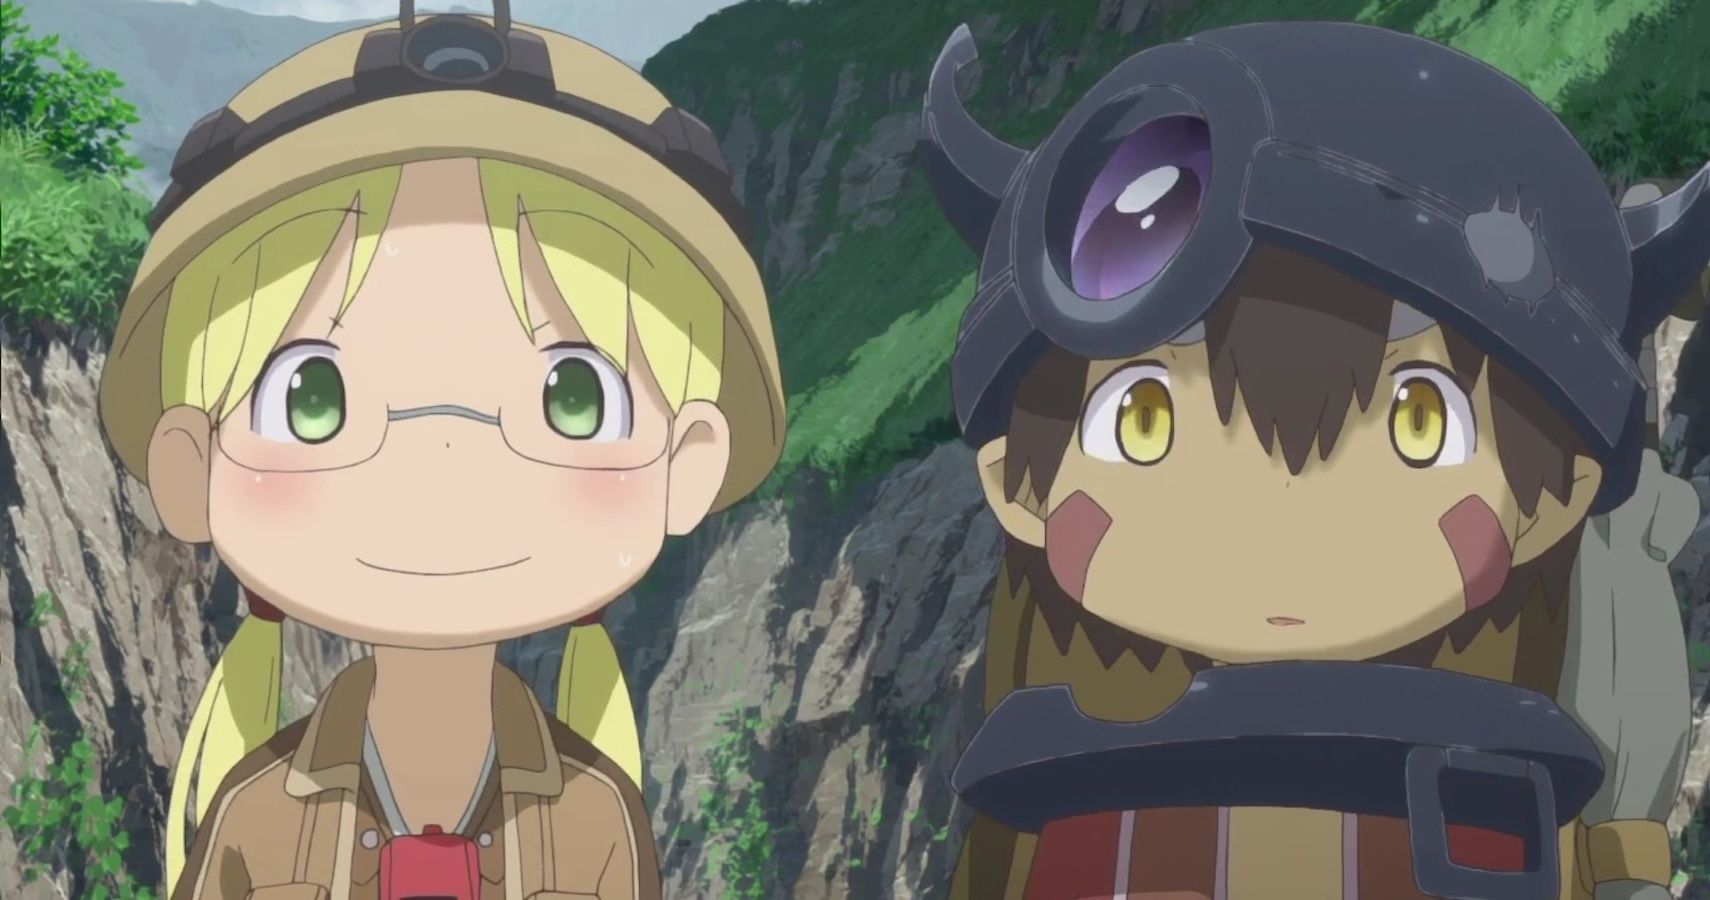 Crunchyroll - Made in Abyss: Dawn of the Deep Soul Anime Film Set